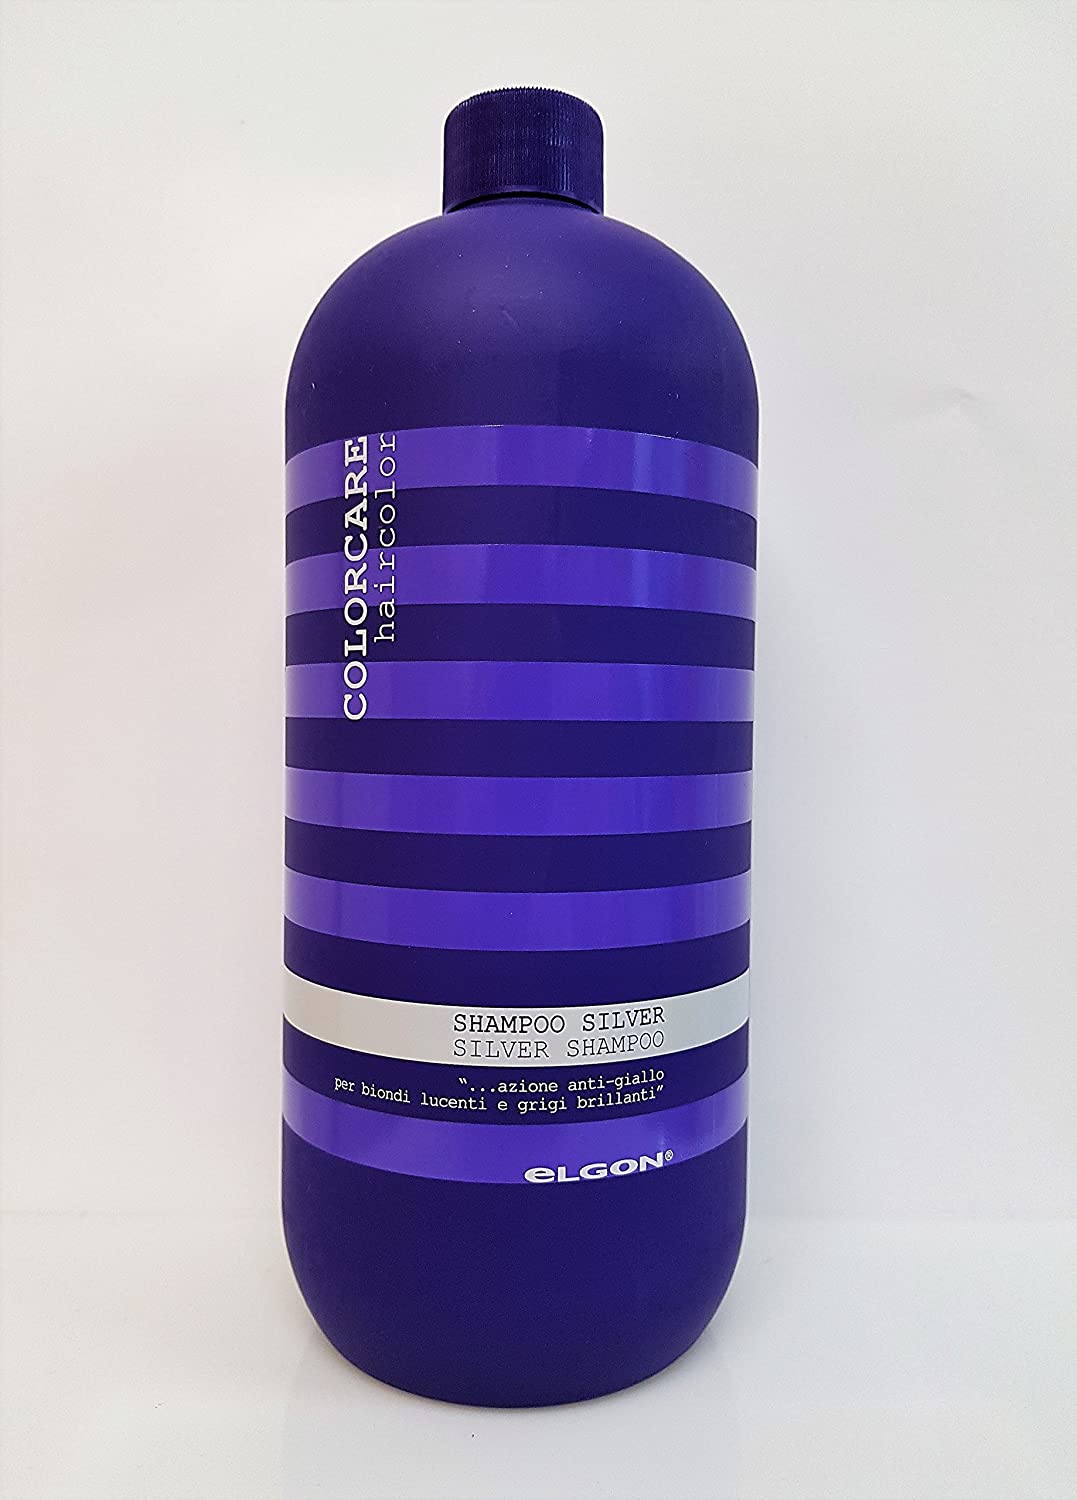 Elgon Silver Shampoo - Ultimate Hair and Beauty